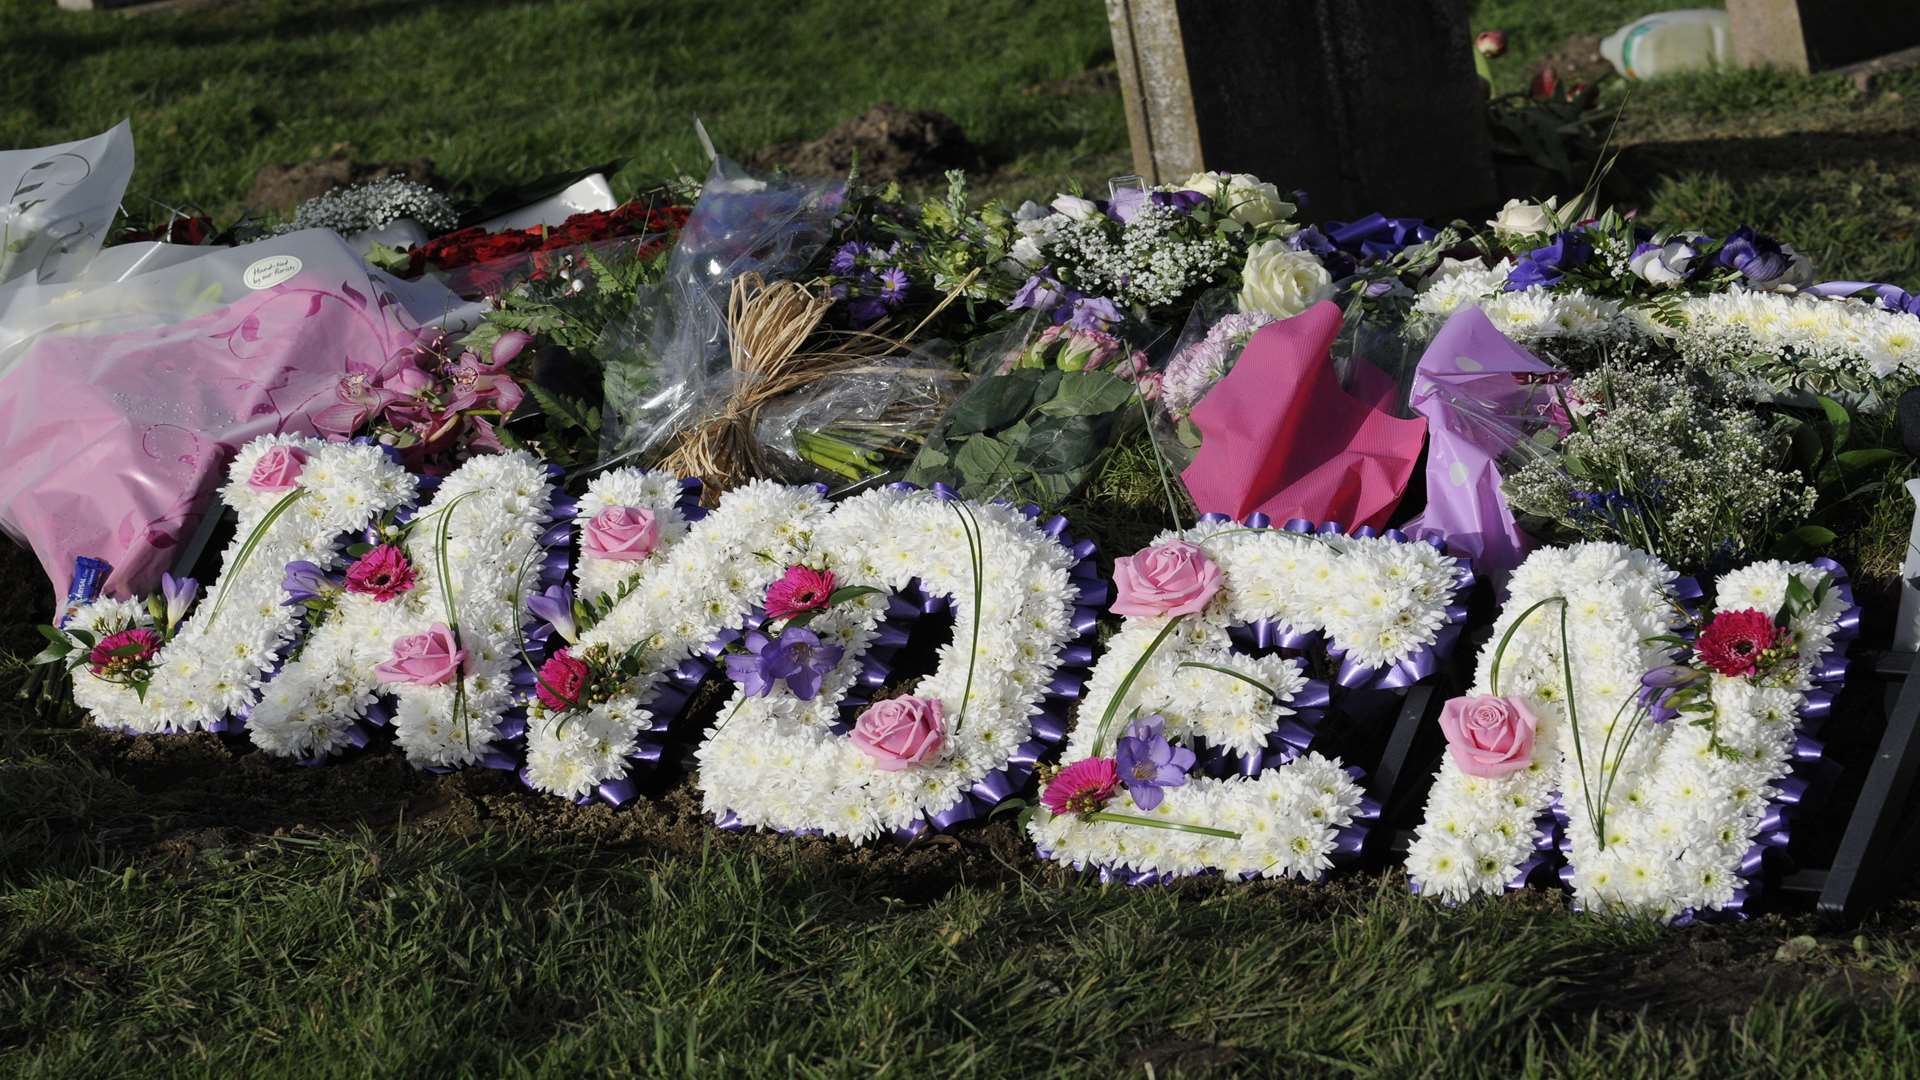 Flowers placed at the grave of Jayden Parkinson at St Martin's Church in Cheriton